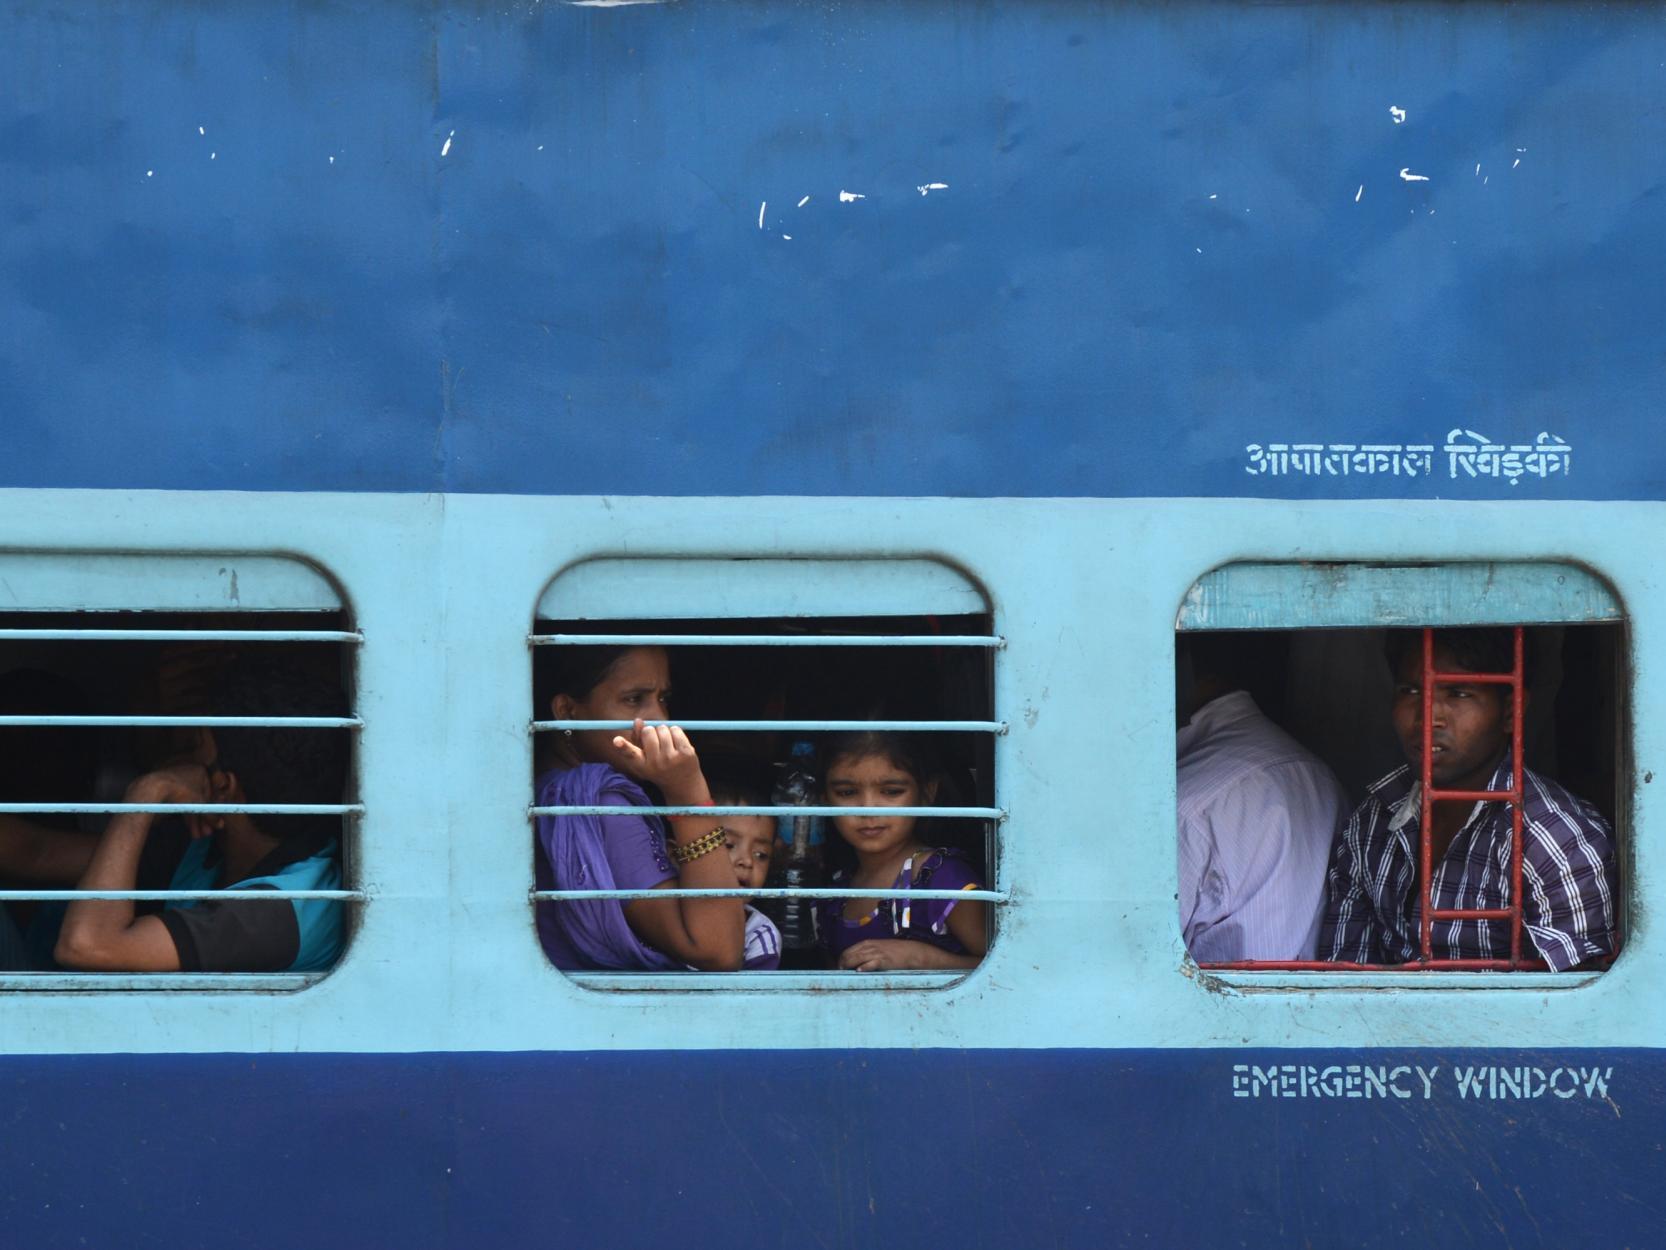 Poorer Indians are priced out of travelling in air-conditioned train carriages